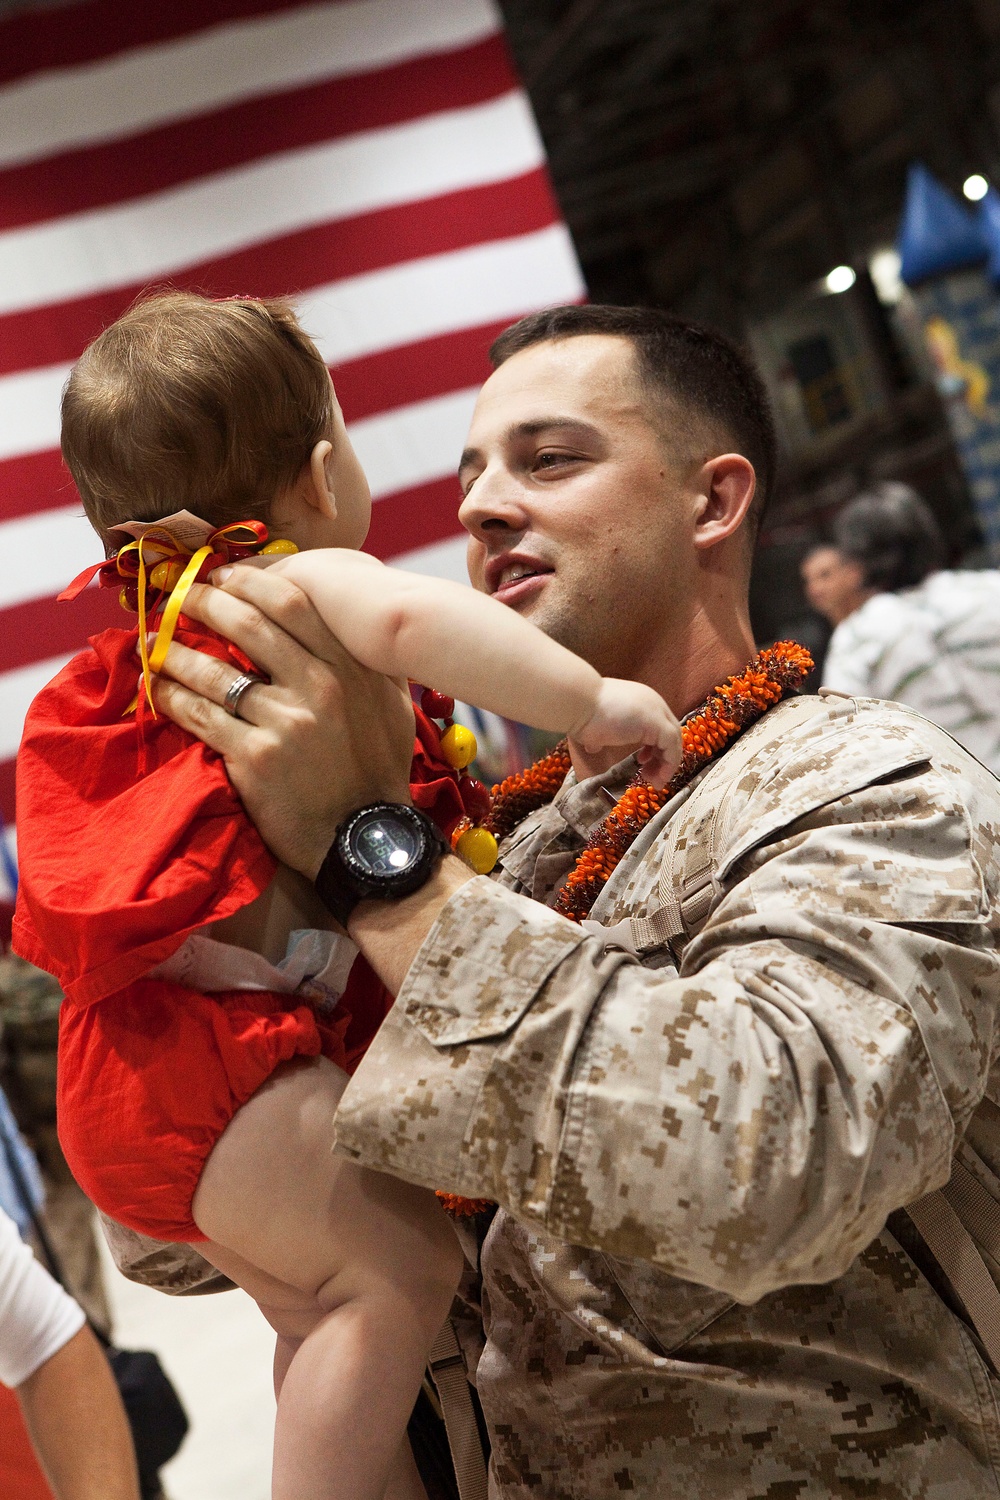 Conduits for Progress: 'America’s Battalion' returns successful from Afghanistan deployment